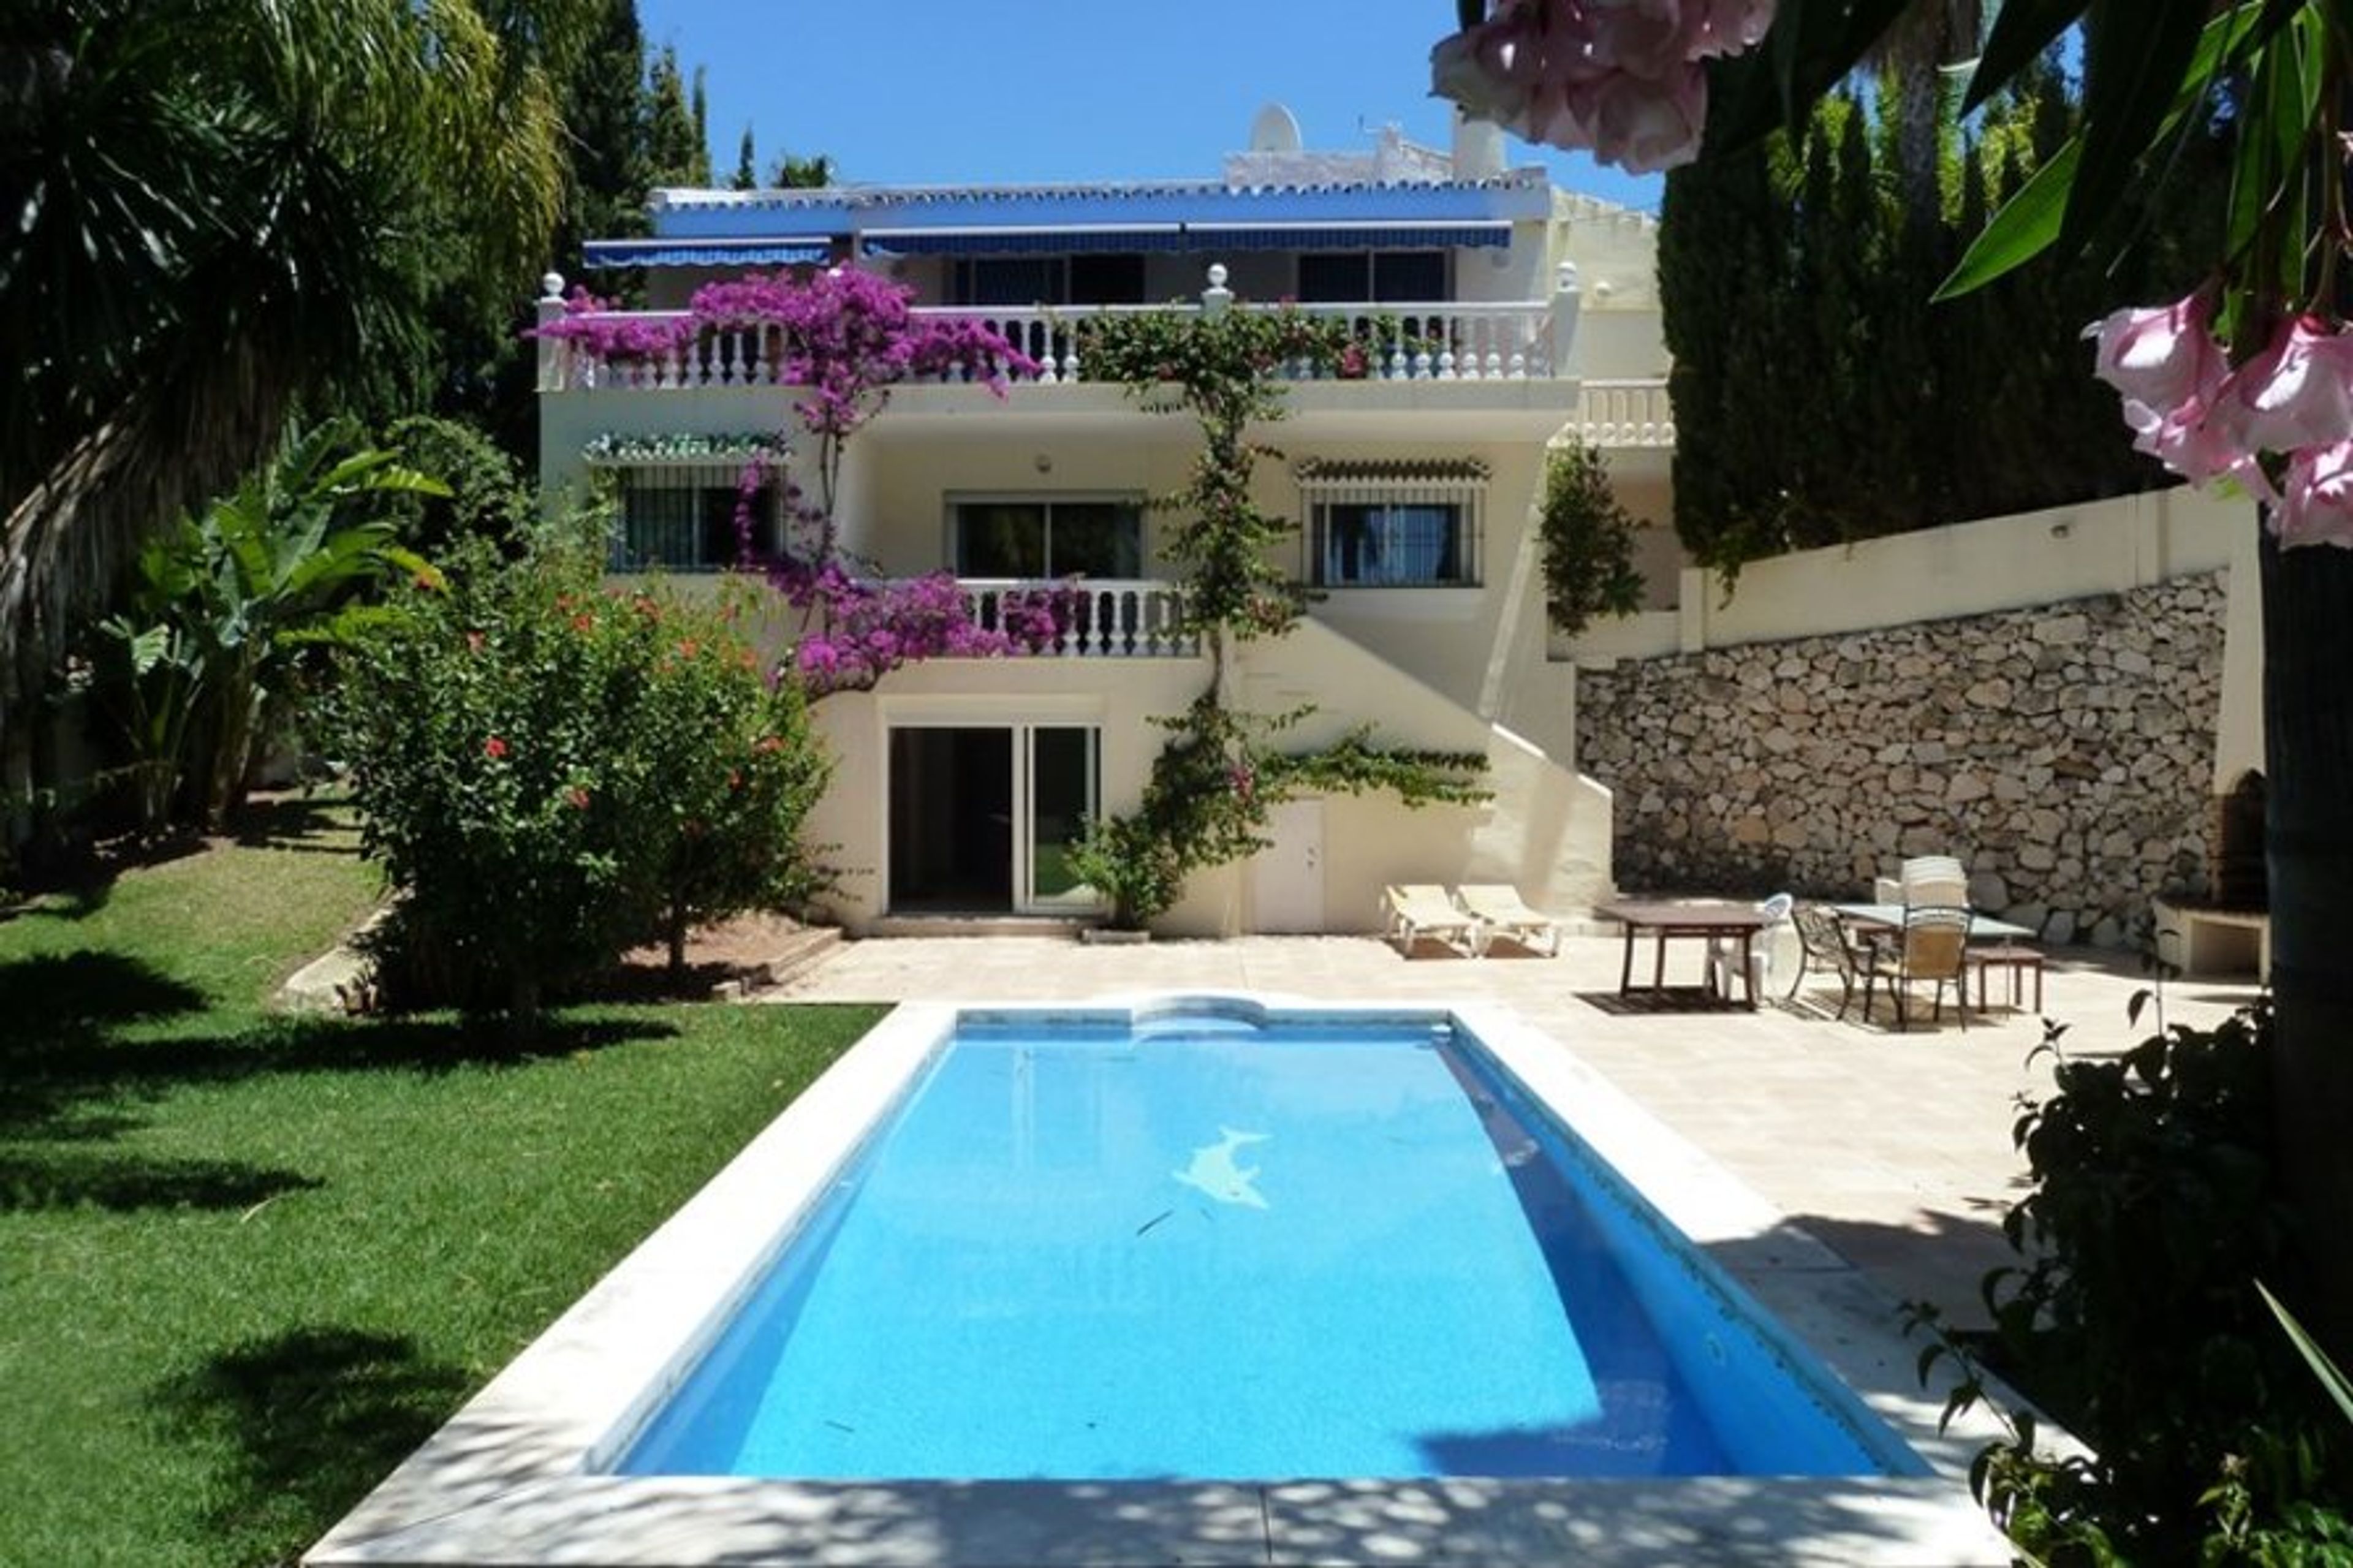 View of rear garden, swimming pool and back of villa